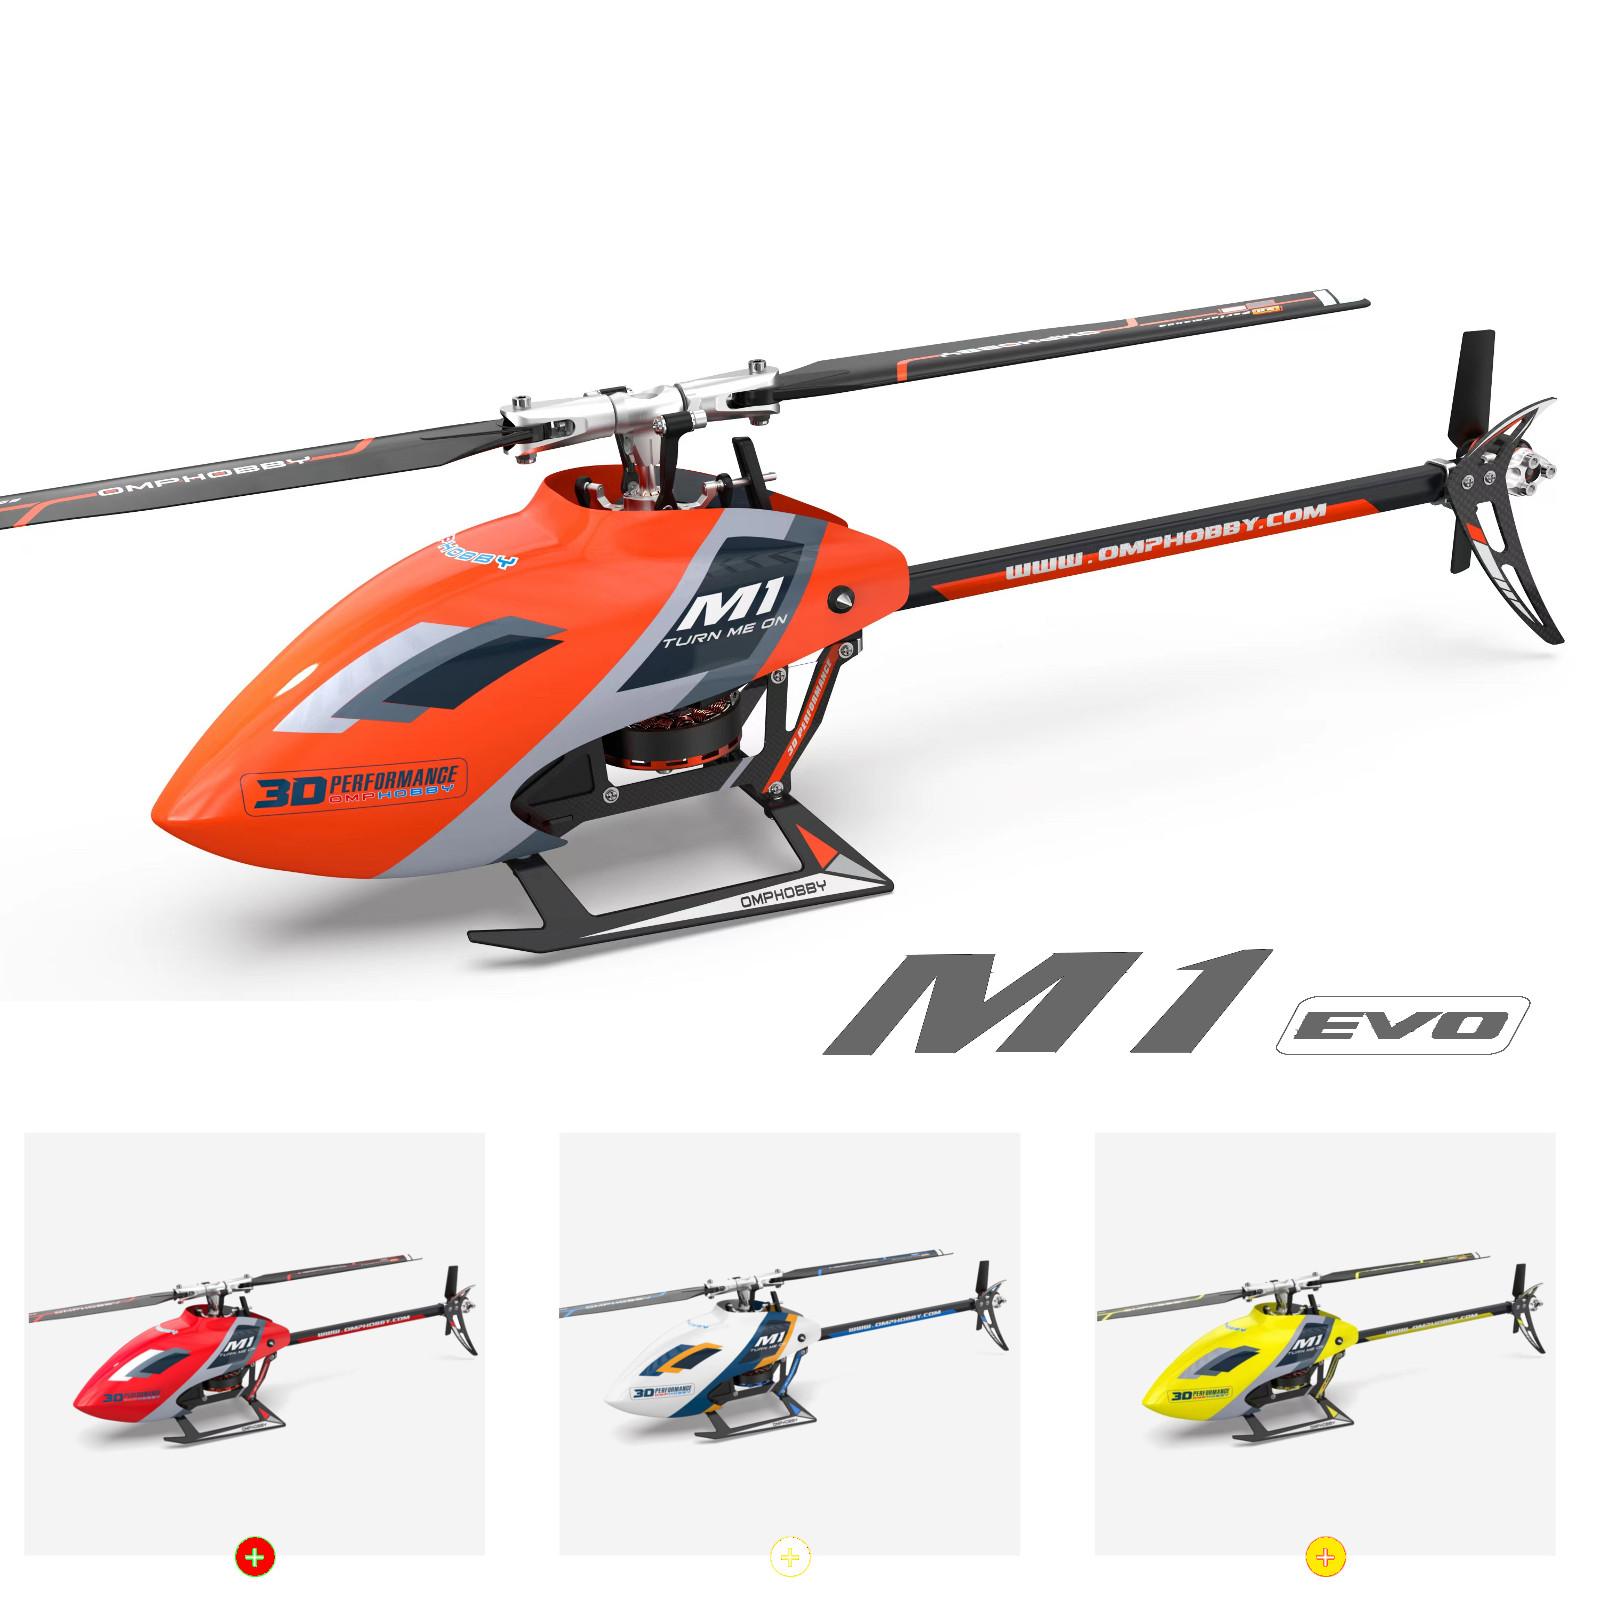 Brushless Rc Helicopter:  Benefits of Brushless RC Helicopters